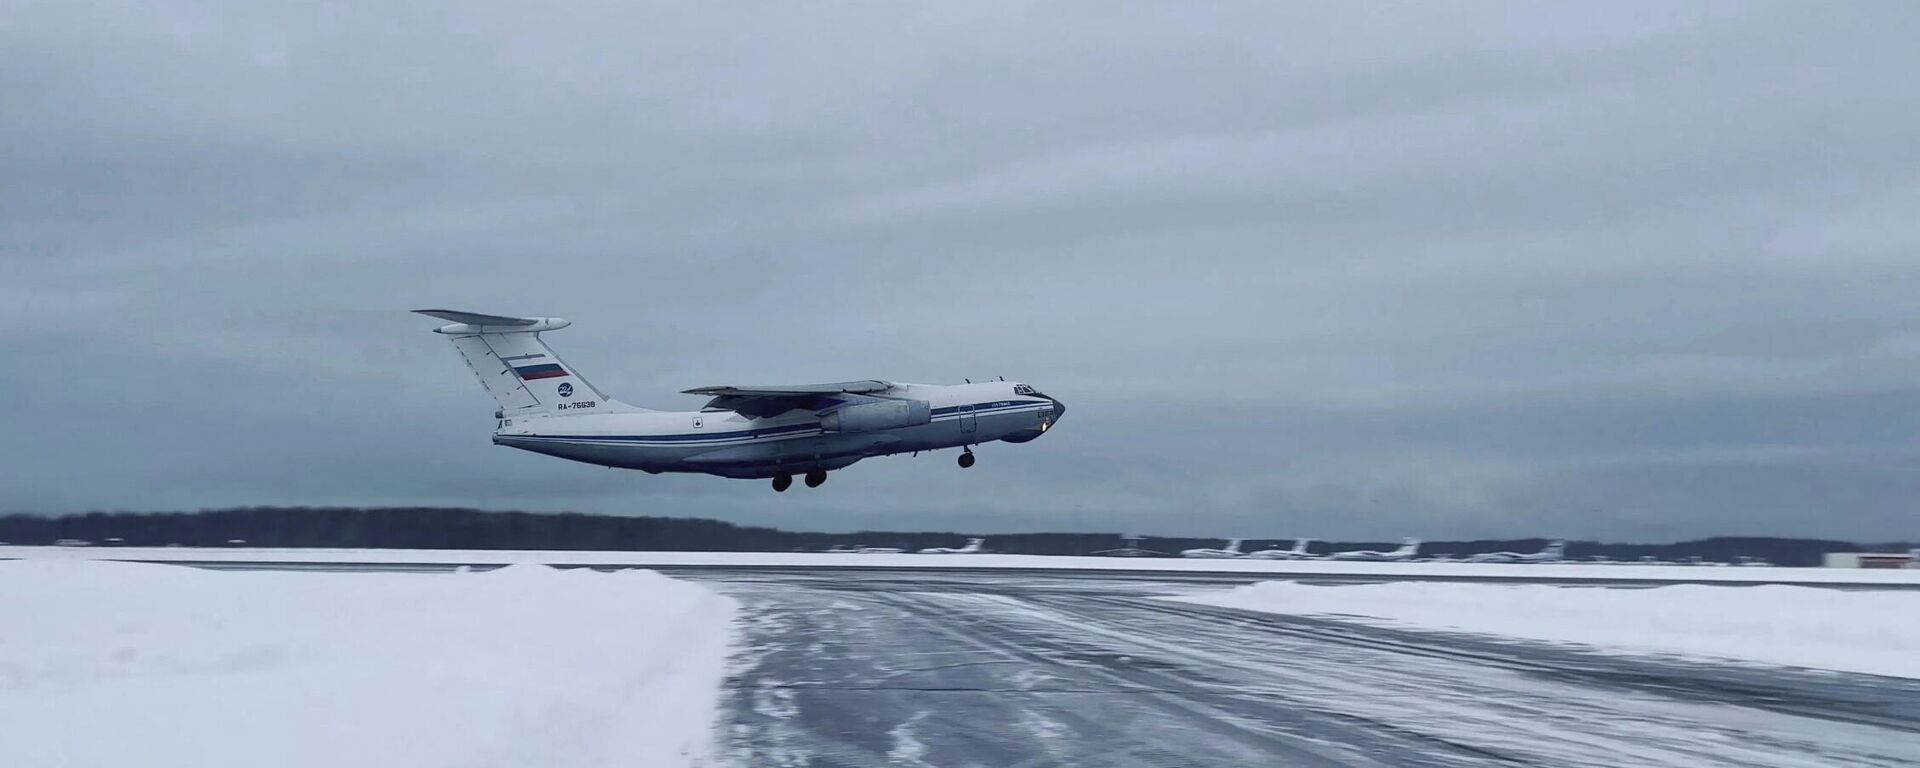 A military aircraft carrying Russian servicemen takes off from an airfield on its way to Kazakhstan, outside Moscow, Russia January 6, 2022, in this still image taken from video. Russian paratroopers have been deployed to Kazakhstan as part of a peacekeeping force that includes troops from four other former Soviet republics. - Sputnik International, 1920, 10.01.2022